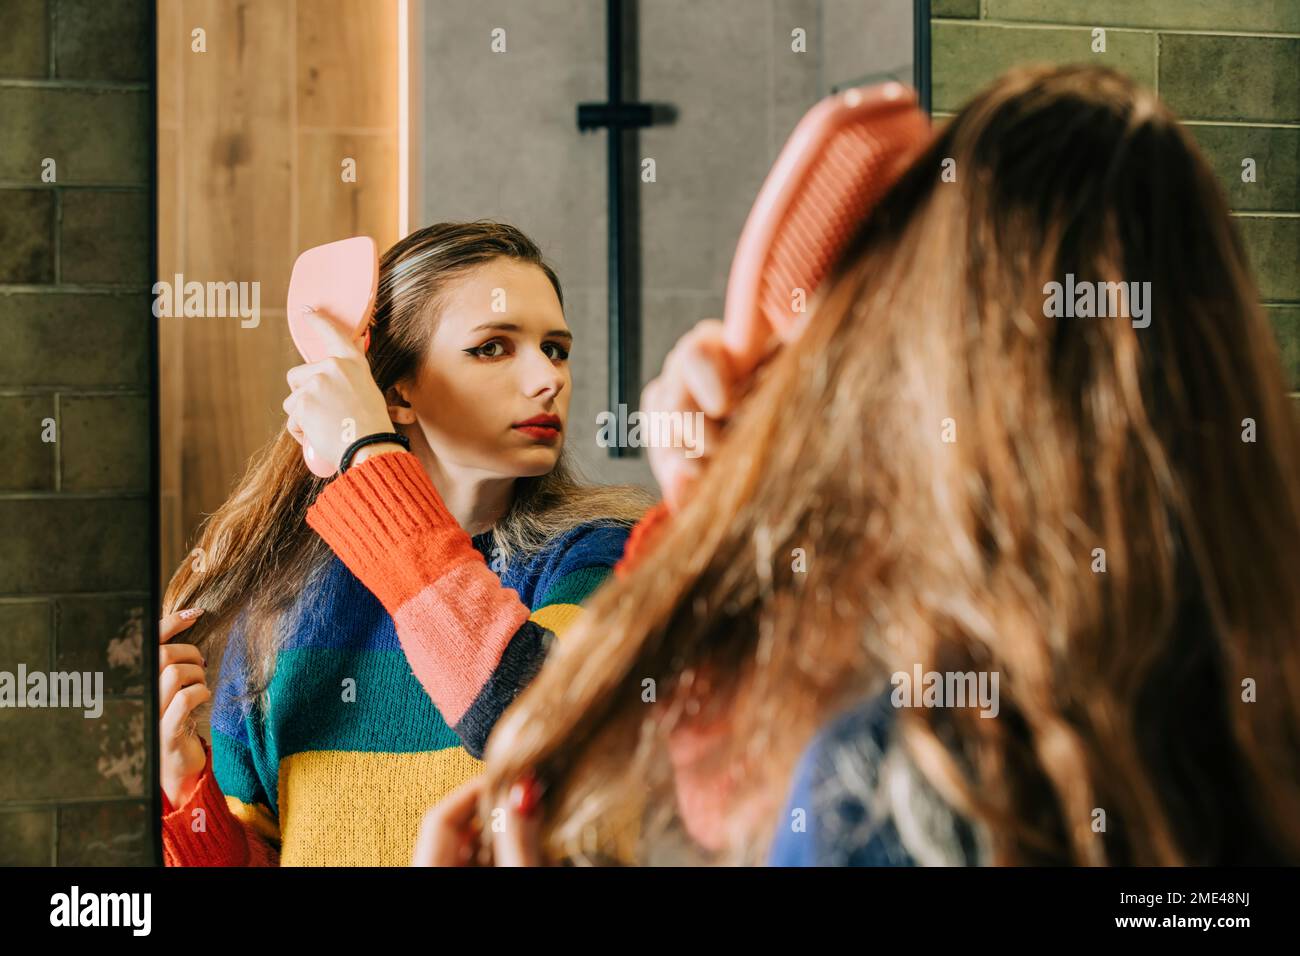 Girl brushing hair with comb looking in bathroom mirror Stock Photo